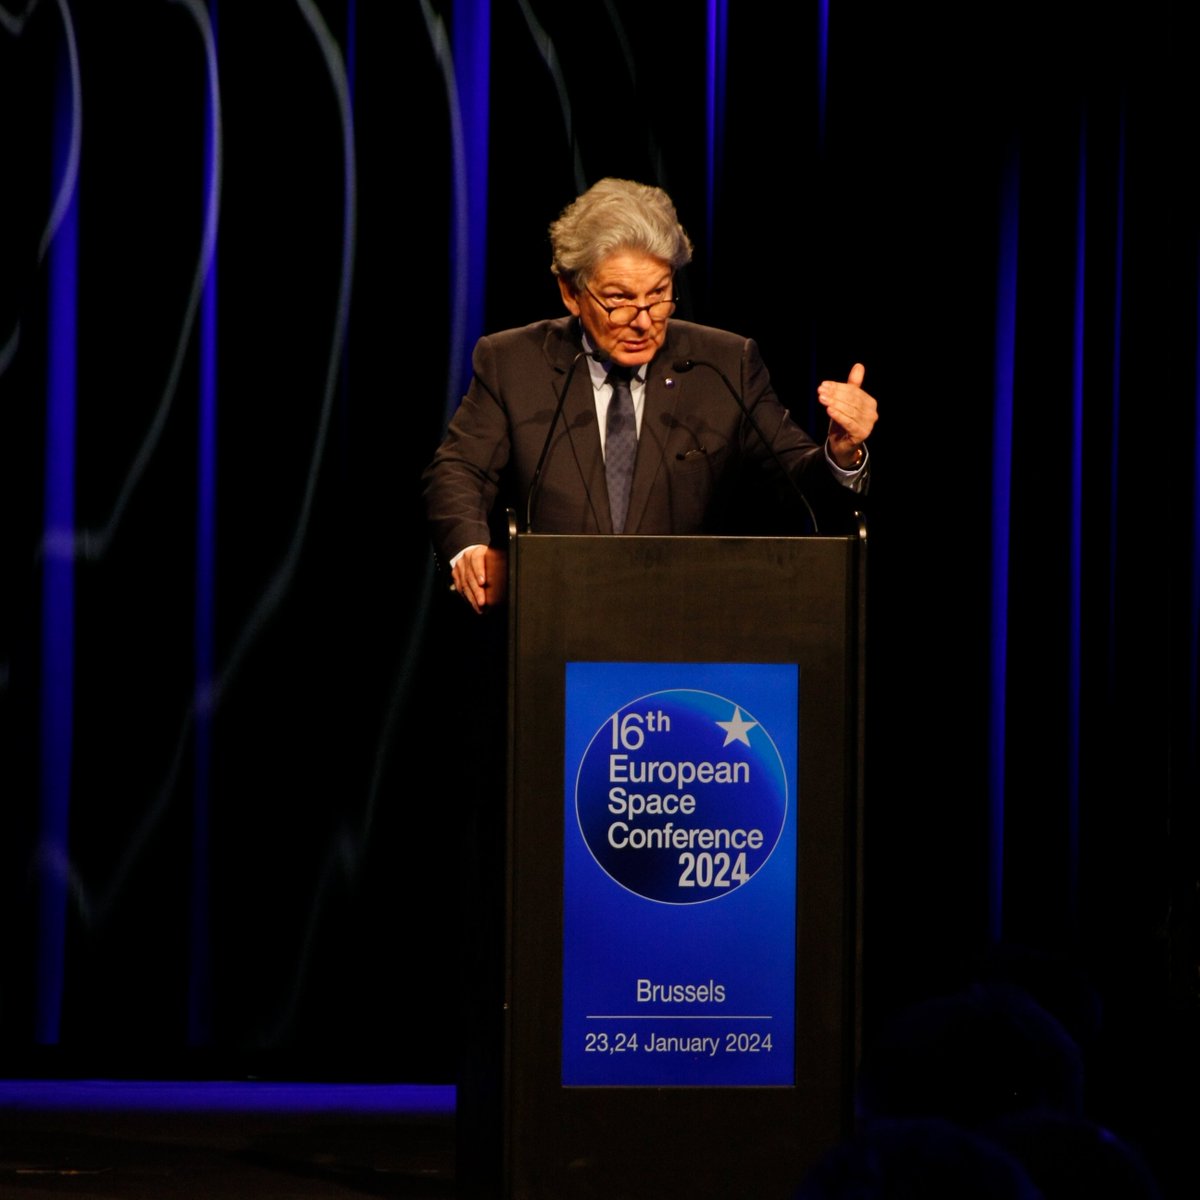 🔴Live from the 2024 #EuropeanSpaceConf Commissioner @ThierryBreton highlighted that we have to build a true #EUSpace market and to turn our vision for space policy into reality, fostering the security, autonomy & resilience of the 🇪🇺's space activities